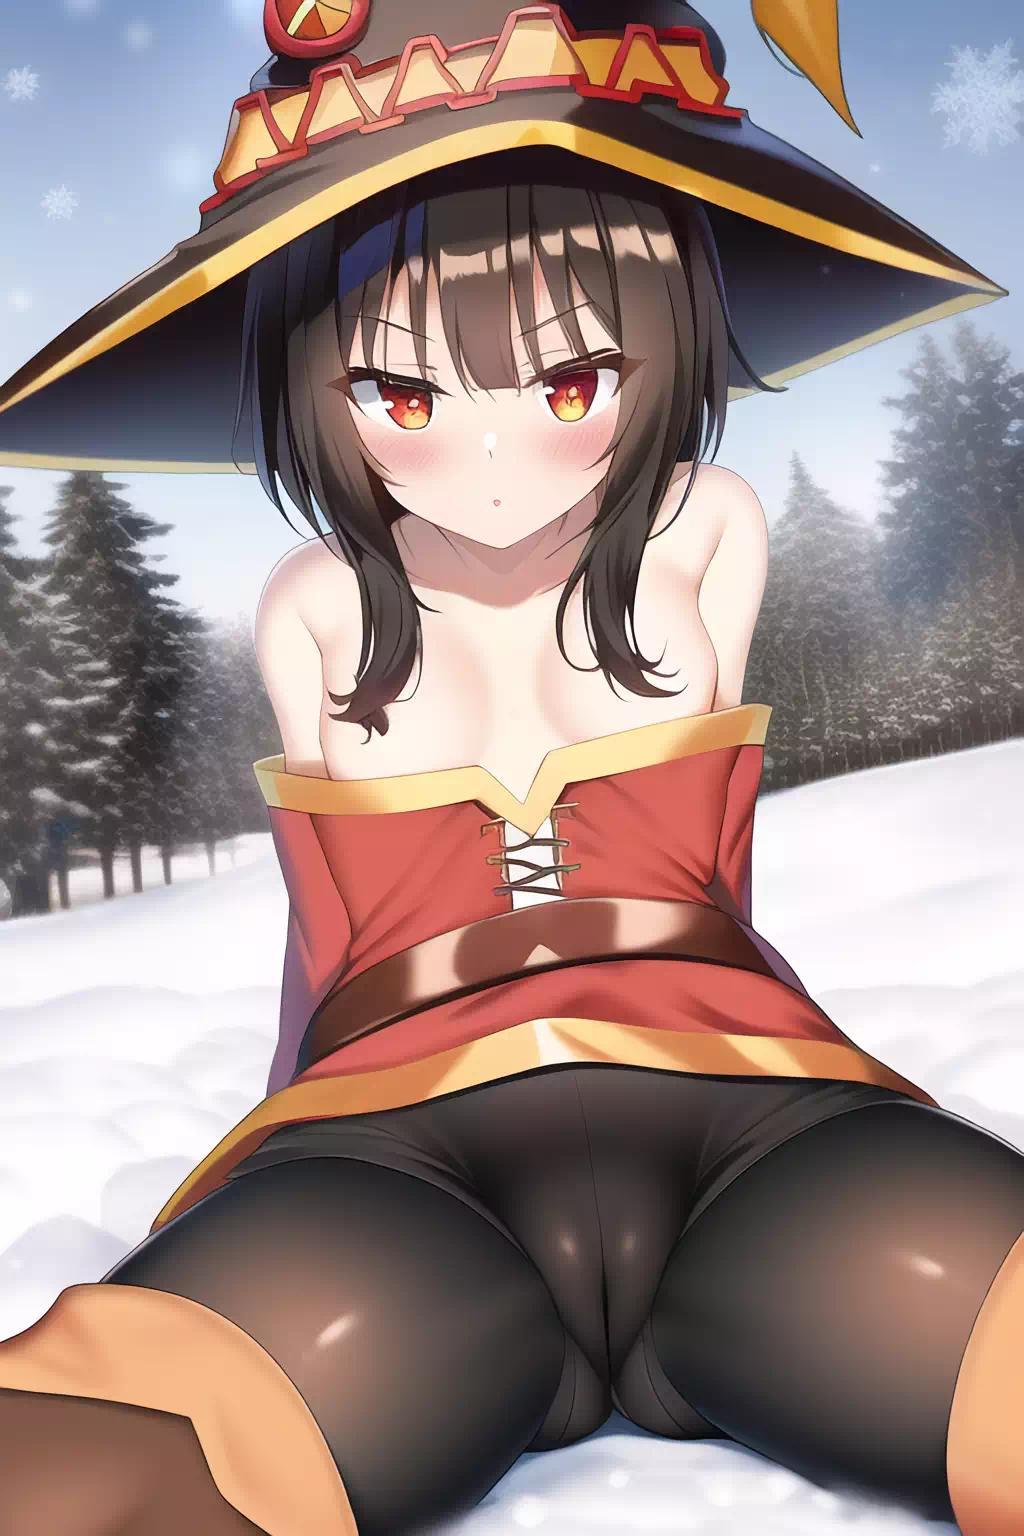 Megumin in the Snow